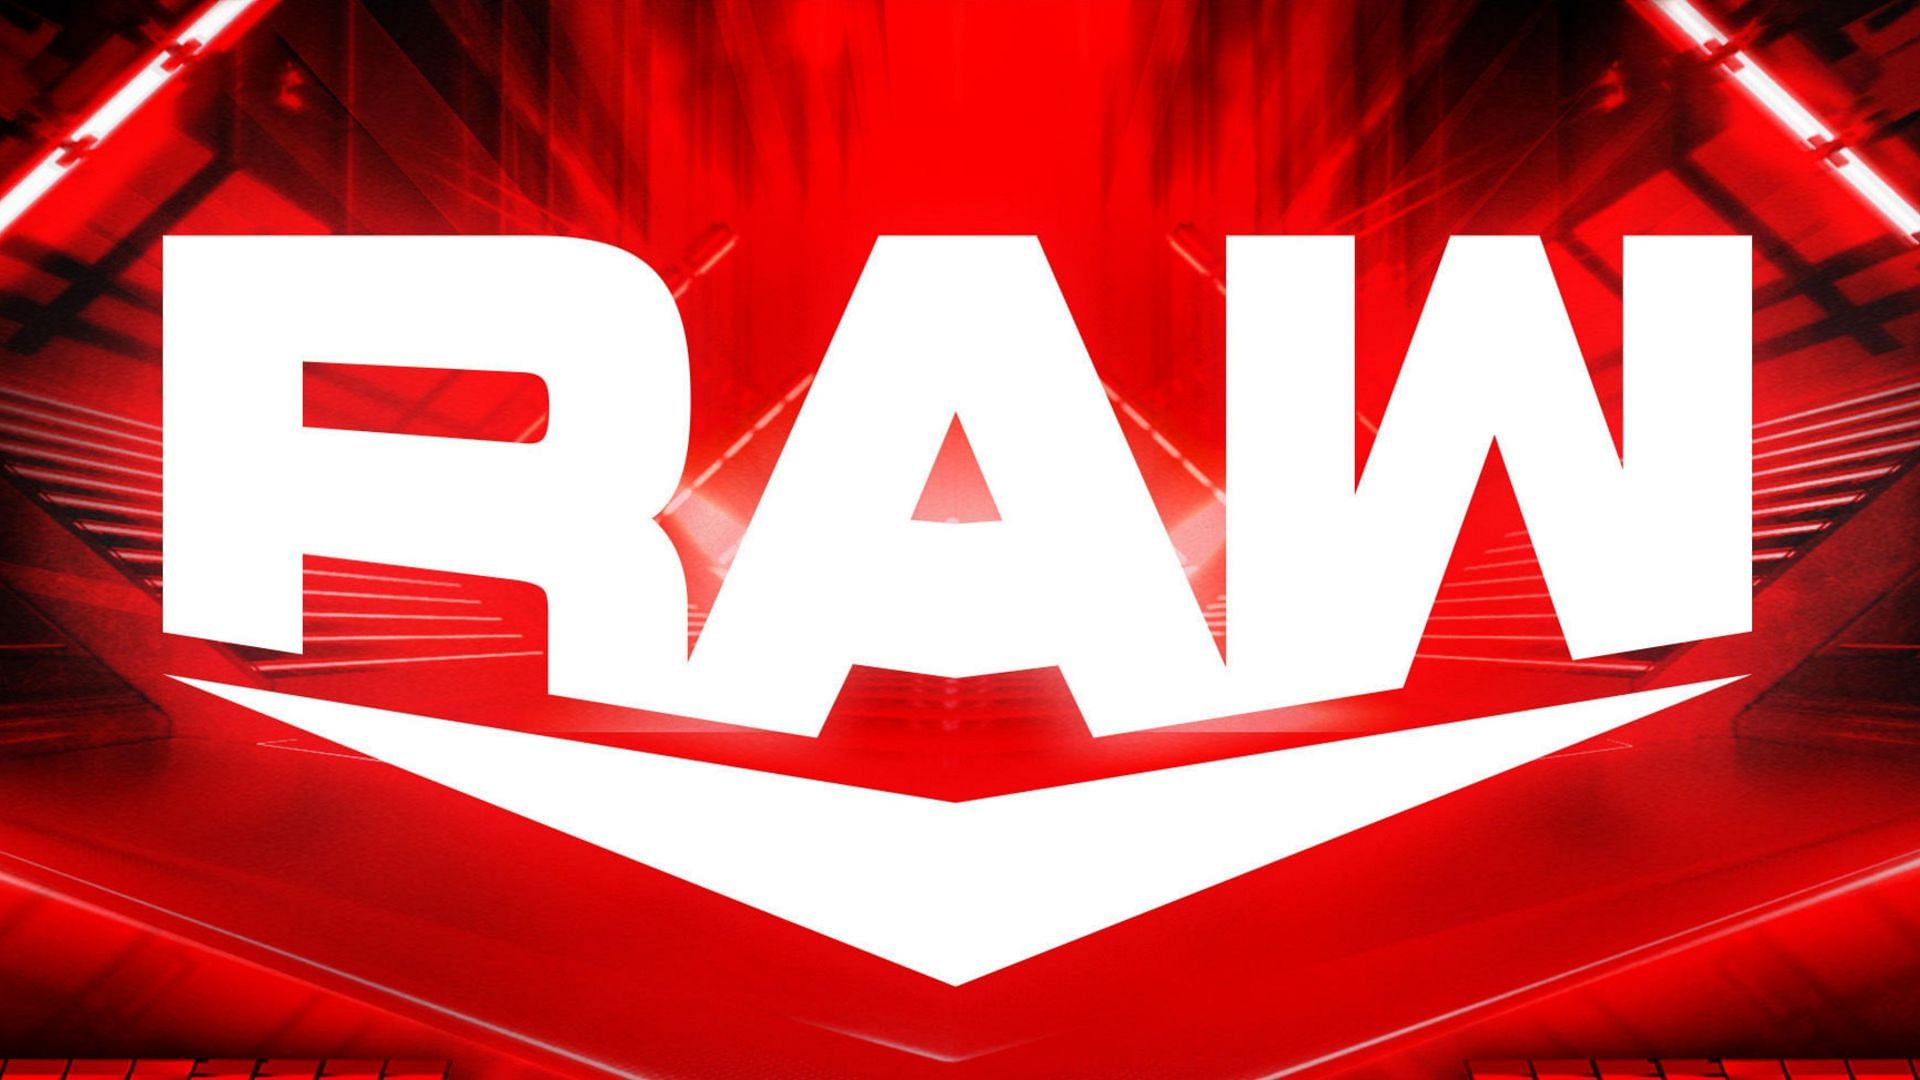 Liv Morgan is currently on the WWE RAW roster